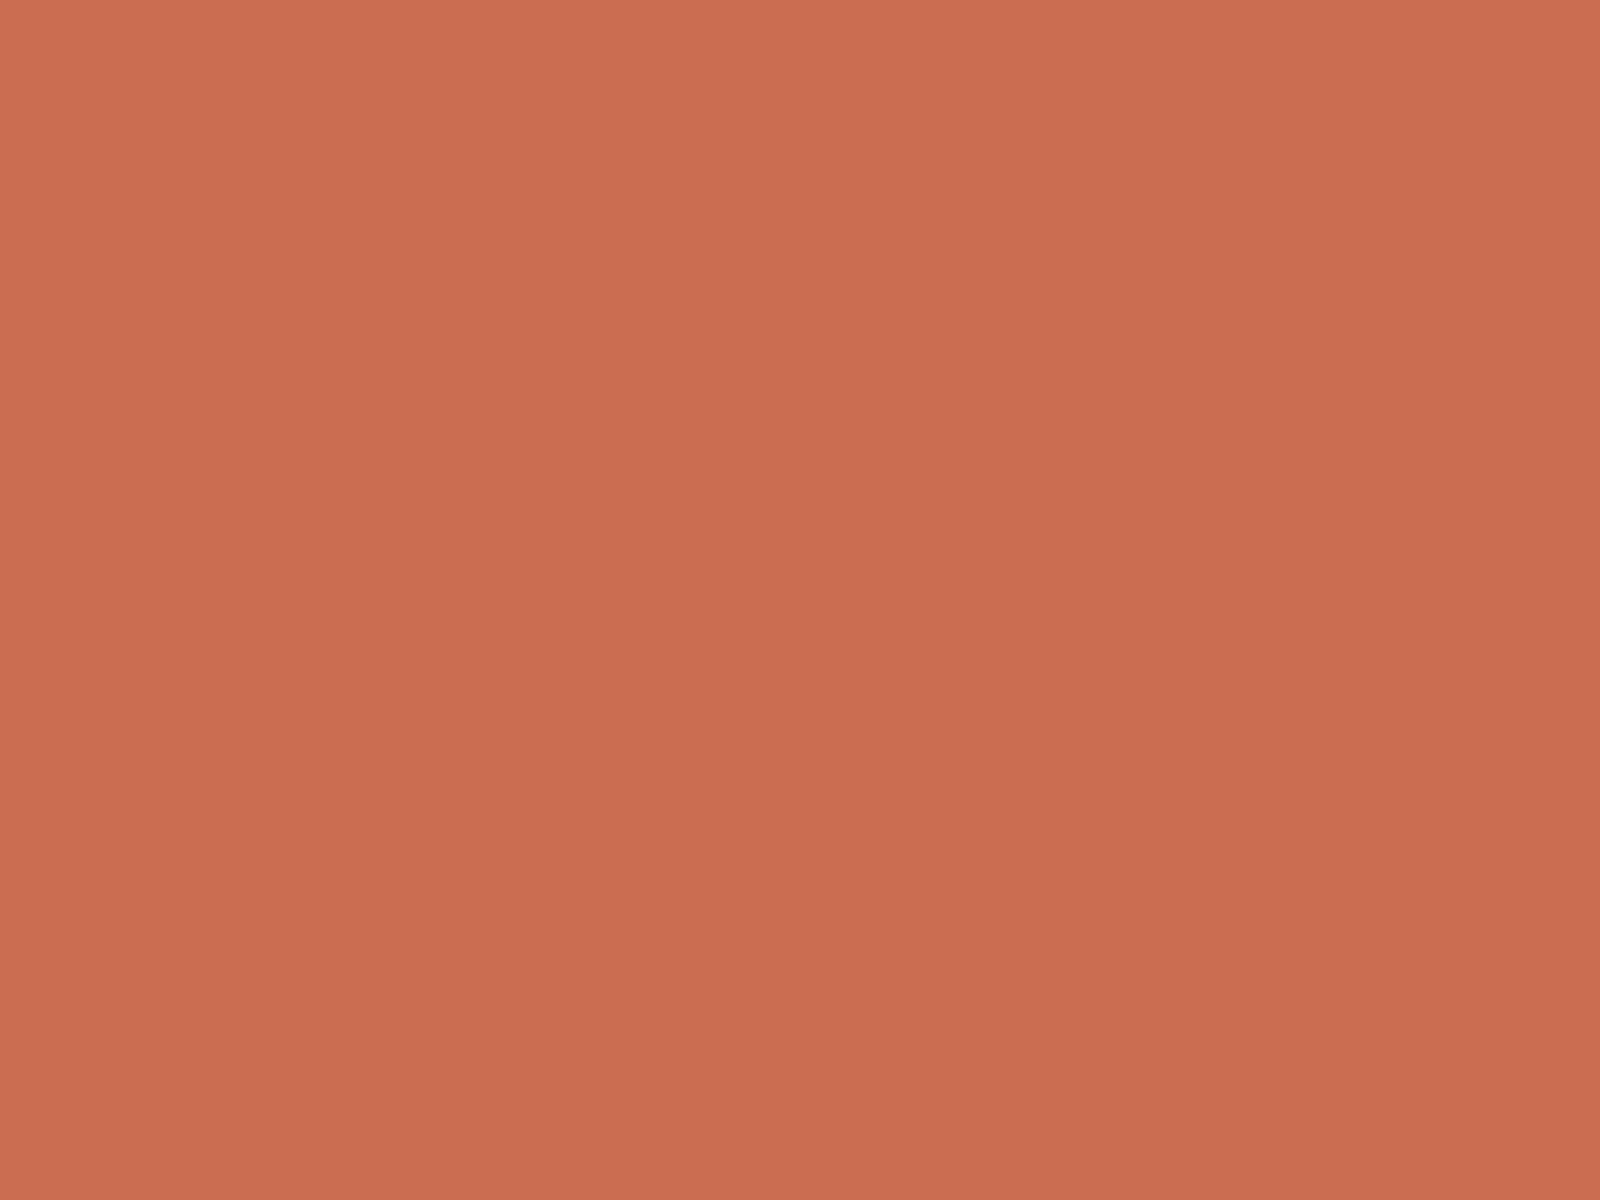 1600x1200 Copper Red Solid Color Background